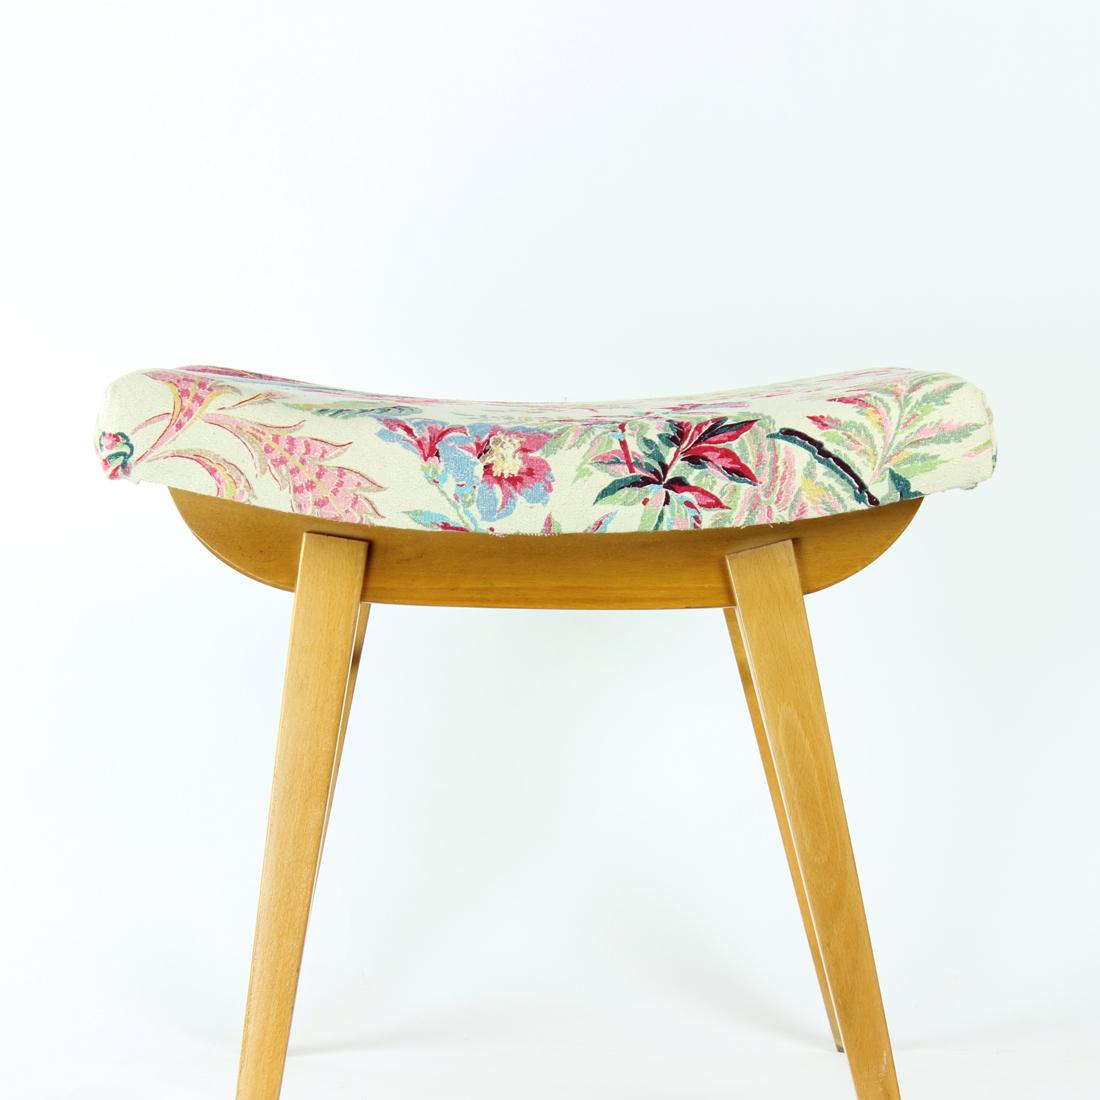 Beautiful and original mid-century foot stool produced in 1960s by TON company. Fully restored with refinished and restored wooden base. It is made of oak wood and full of beautiful details. The seat with new cushion and upholstery in an original